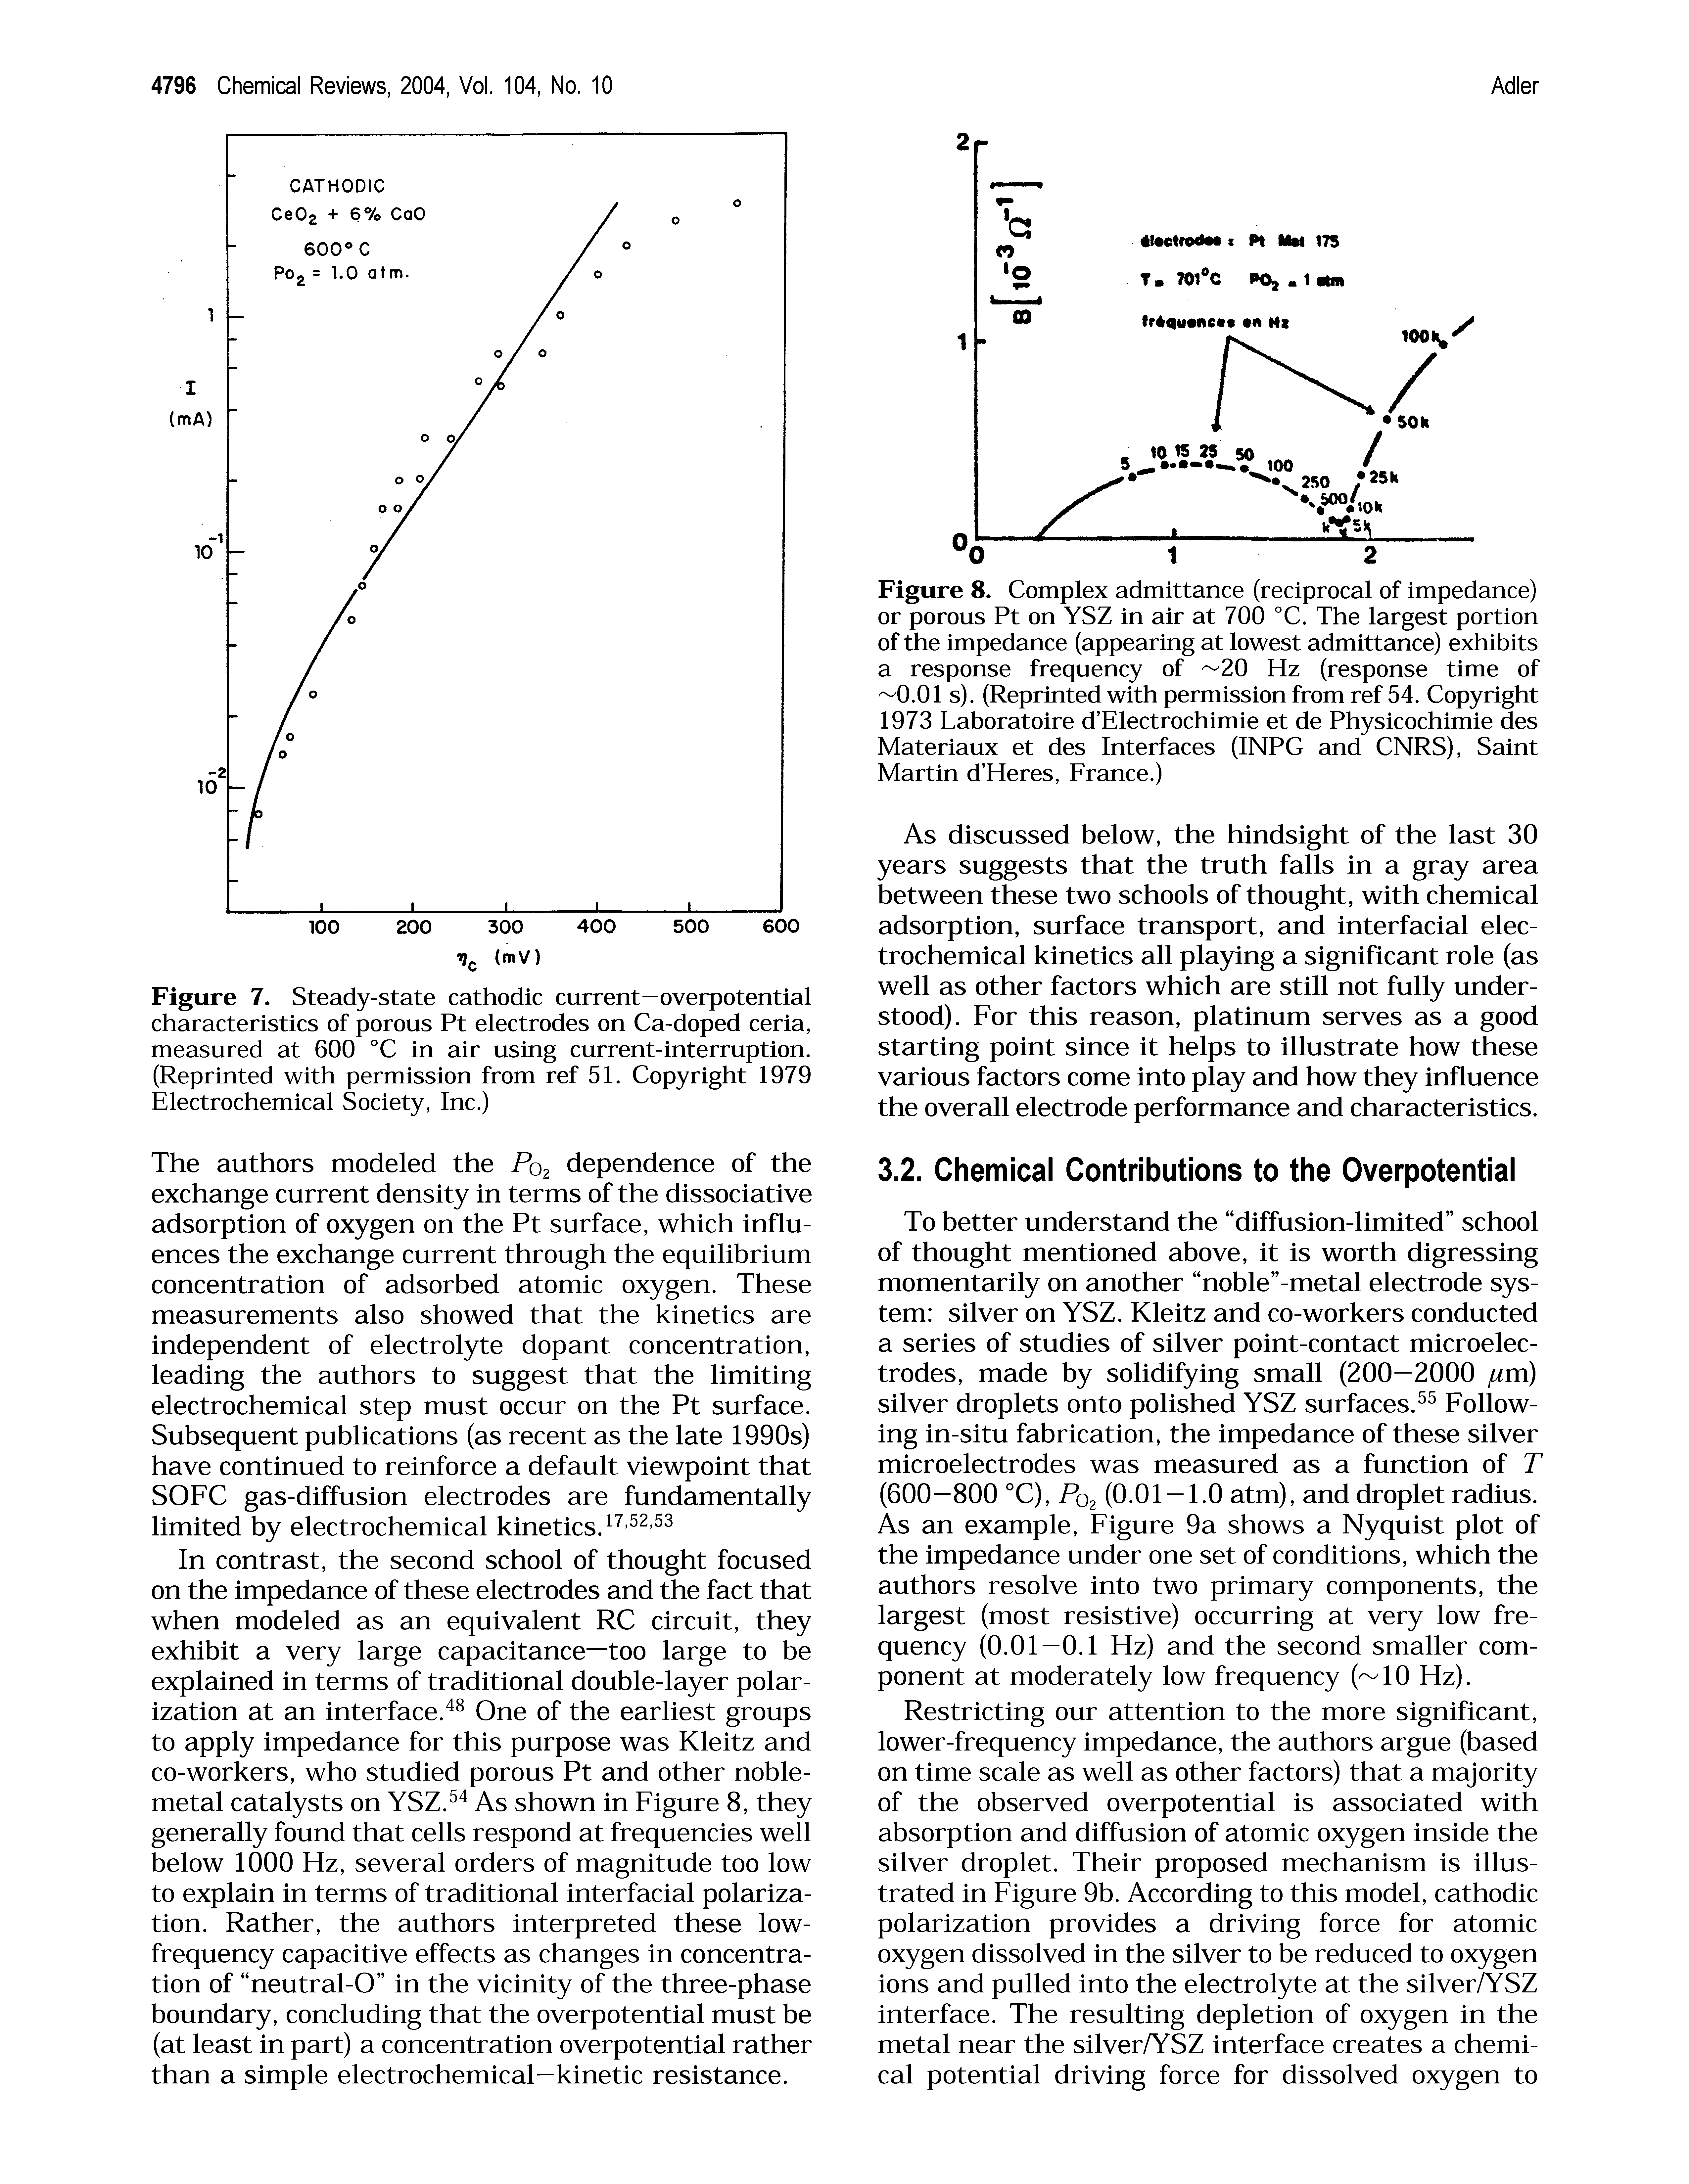 Figure 7. Steady-state cathodic current—overpotential characteristics of porous Pt electrodes on Ca-doped ceria, measured at 600 °C in air using current-interruption. (Reprinted with permission from ref 51. Copyright 1979 Electrochemical Society, Inc.)...